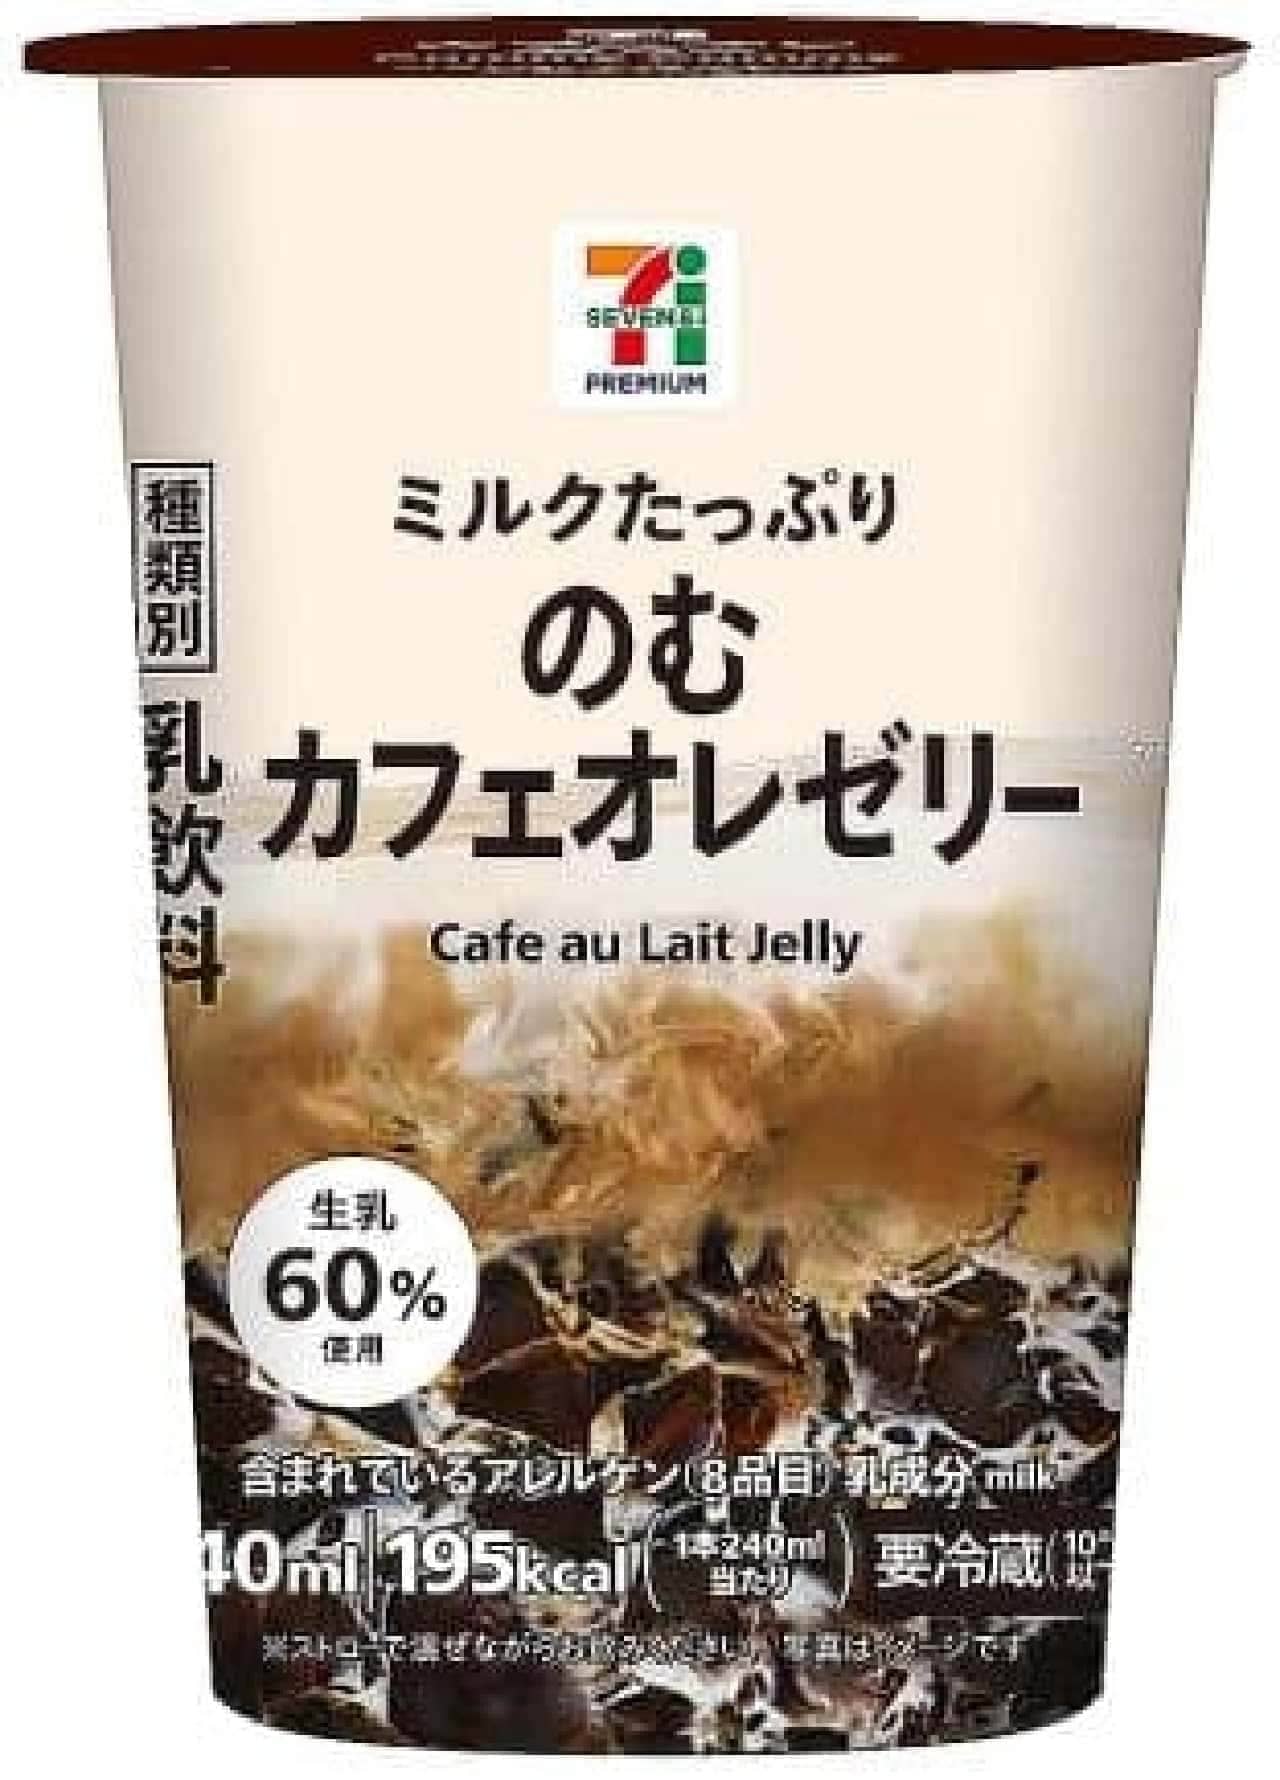 7-ELEVEN "7P Cafe au Lait Jelly with Milk 240ml